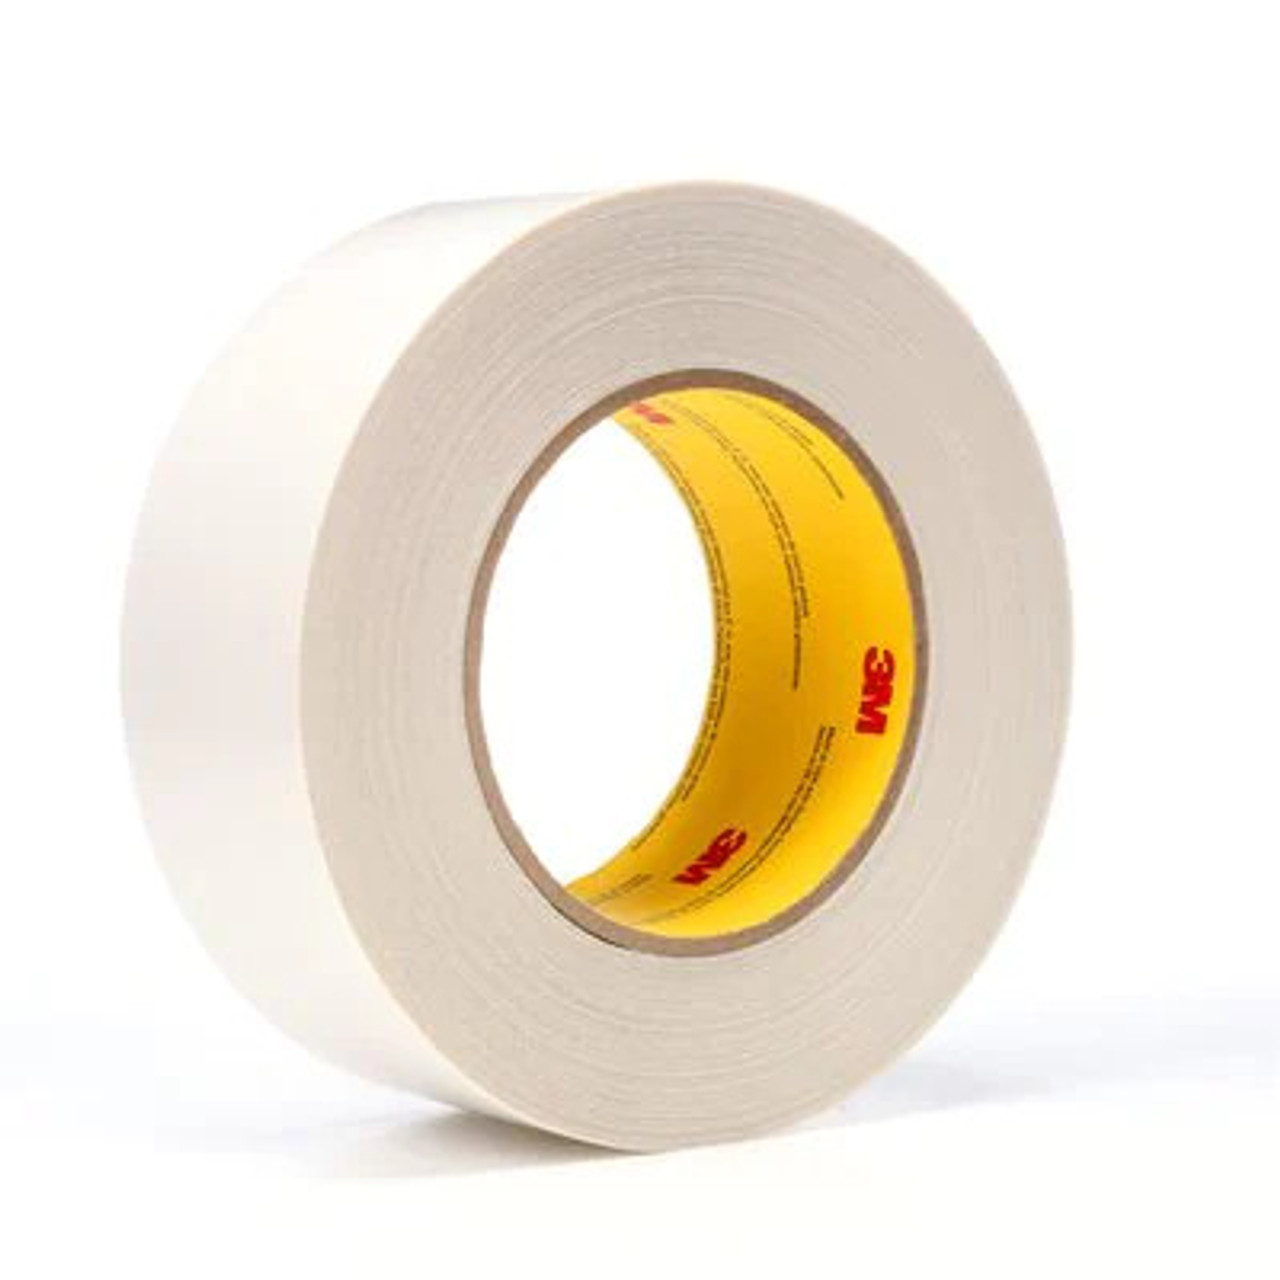 3M™ Venture Tape™ Double Coated PET Tape 514CW, 72 mm x 50 m, 0.01 mm